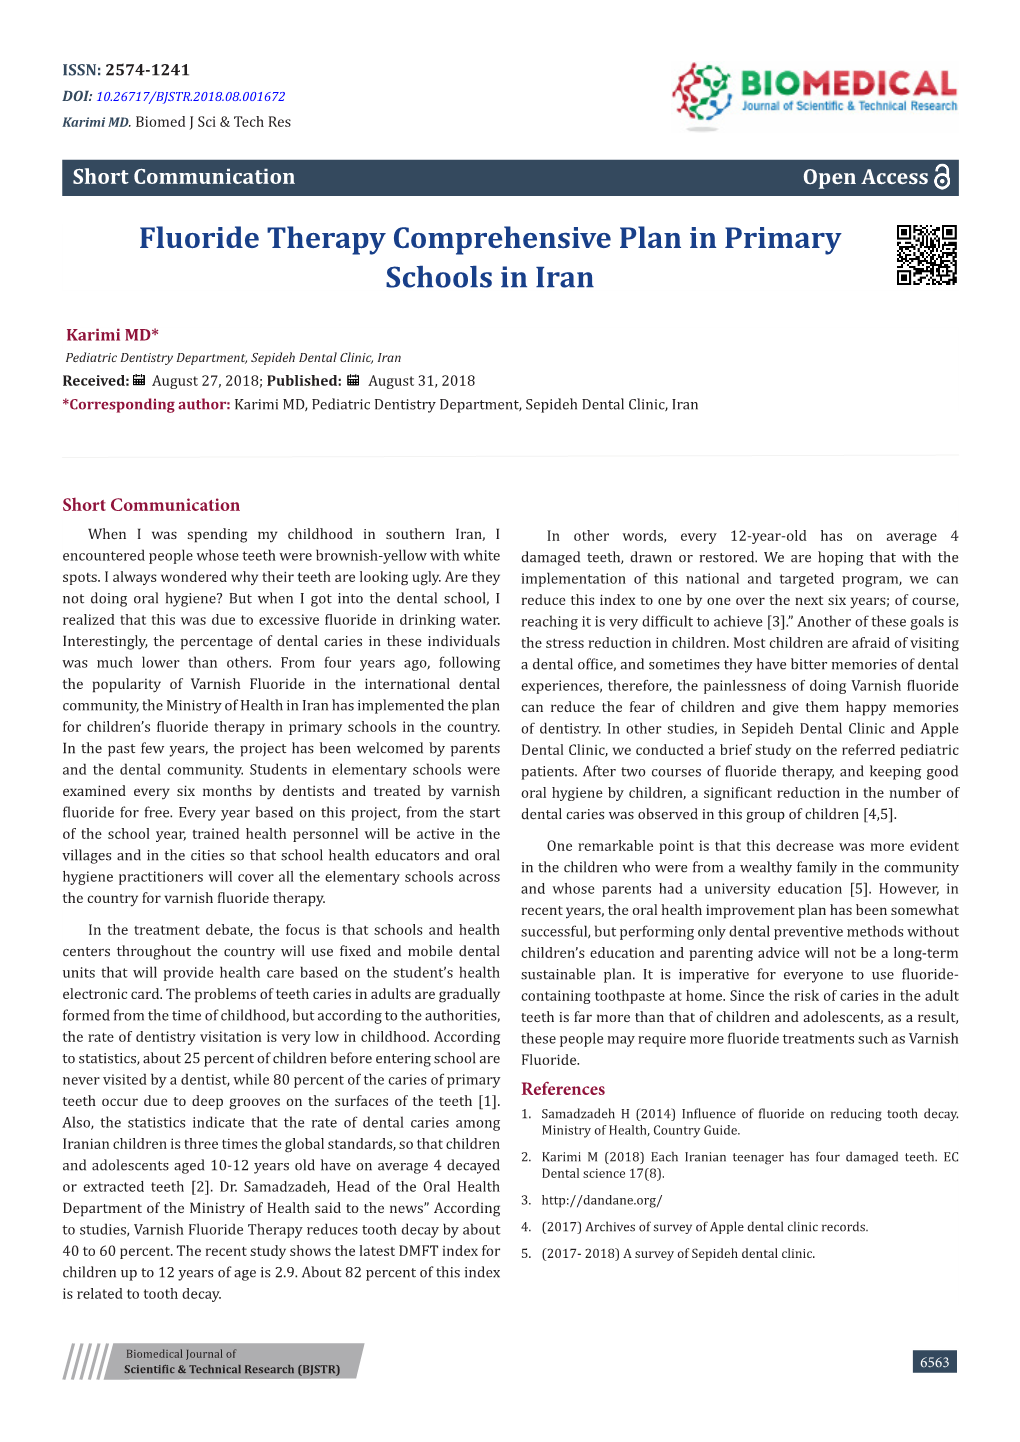 Fluoride Therapy Comprehensive Plan in Primary Schools in Iran